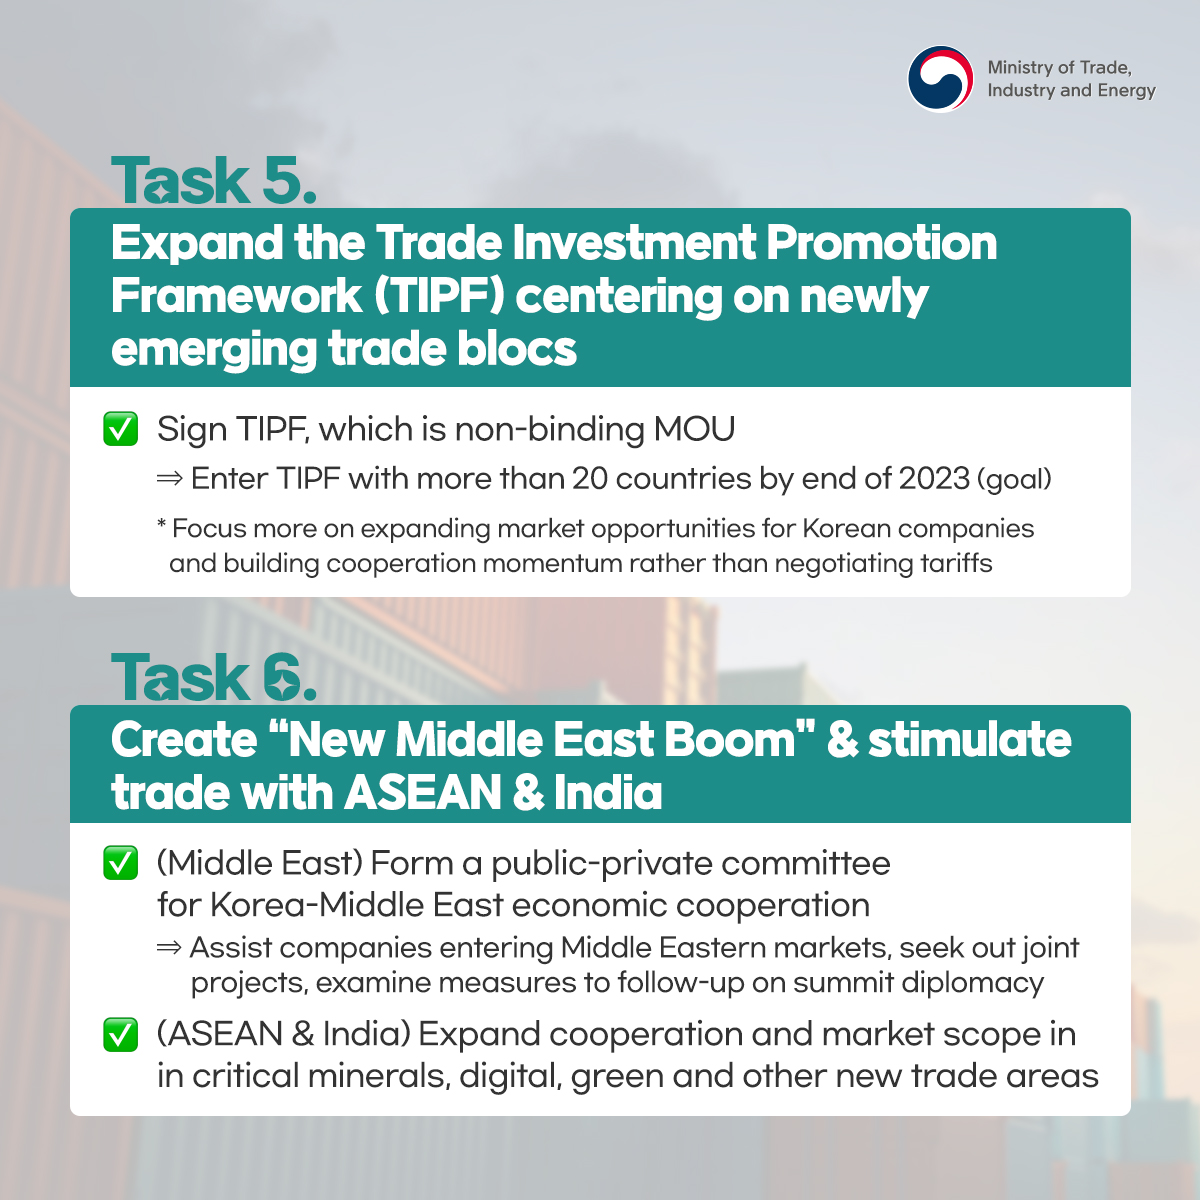 MOTIE announces 10 major tasks for export & investment growth in 2023 Image 3